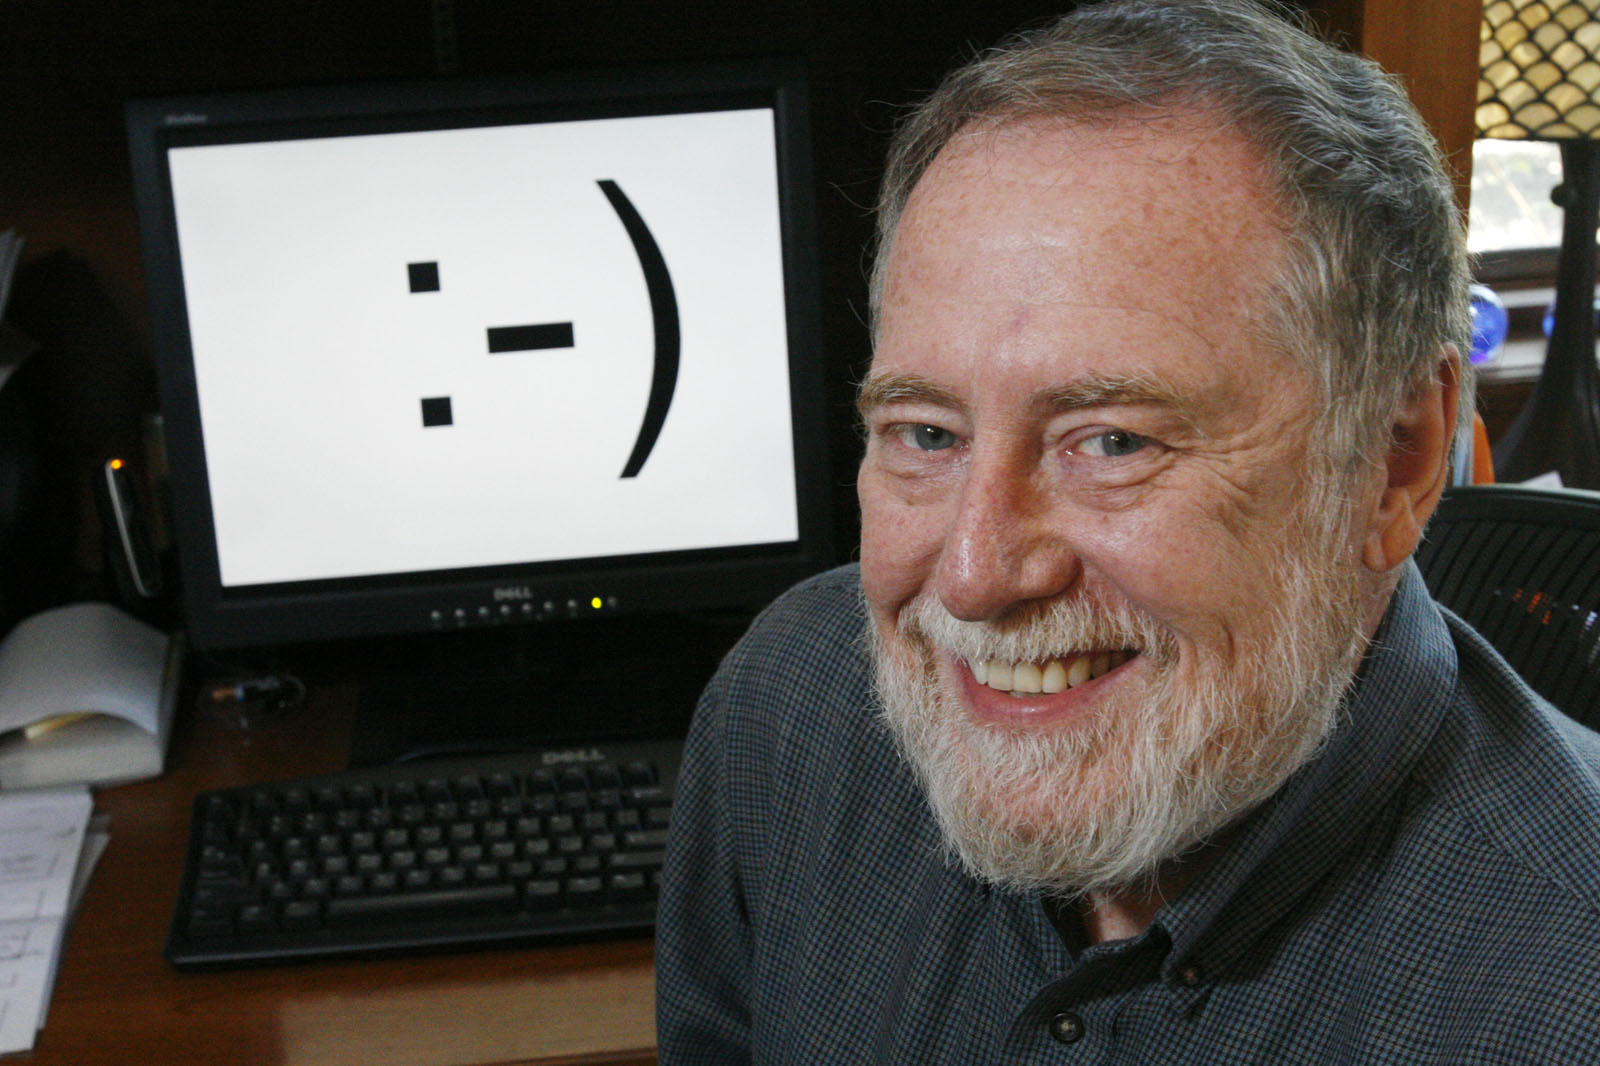 Carnegie Mellon professor Scott E. Fahlman is shown in his home office on Monday, Sept. 17, 2007, in Pittsburgh. Twenty-five years ago, three keystrokes _ a colon followed by a hyphen and a parenthesis _ were first used as a horizontal "smiley face" in a computer message by Fahlman, the university said.  Fahlman posted the emoticon in a message to an online electronic bulletin board at 11:44 a.m. on Sept. 19, 1982. (AP Photo/Gene J. Puskar)